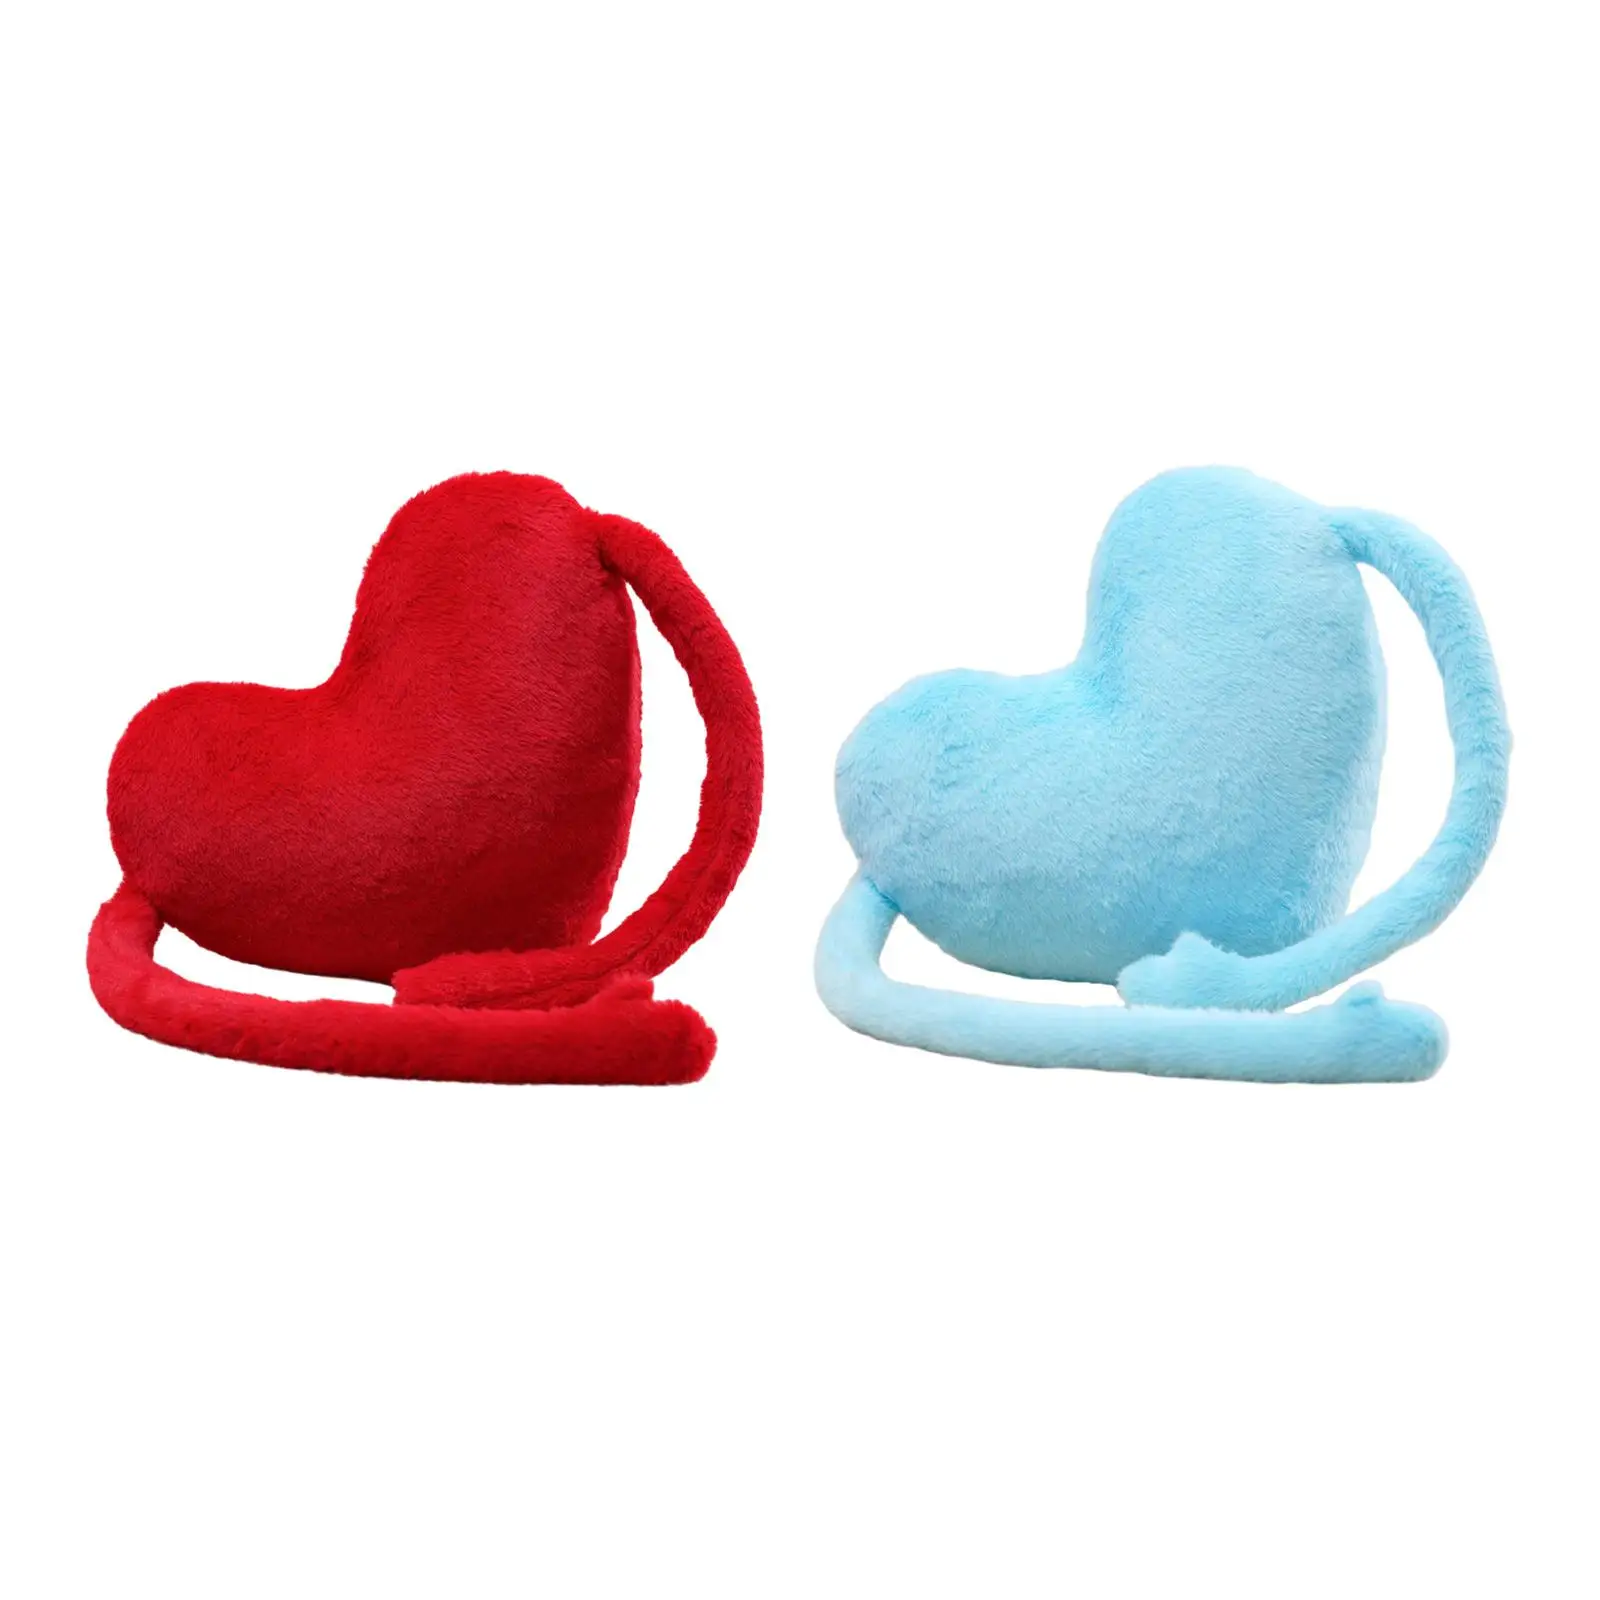 Heart Shaped Pillow Plush Soft Cute Throw Pillow for Indoor Kitchen Outdoor